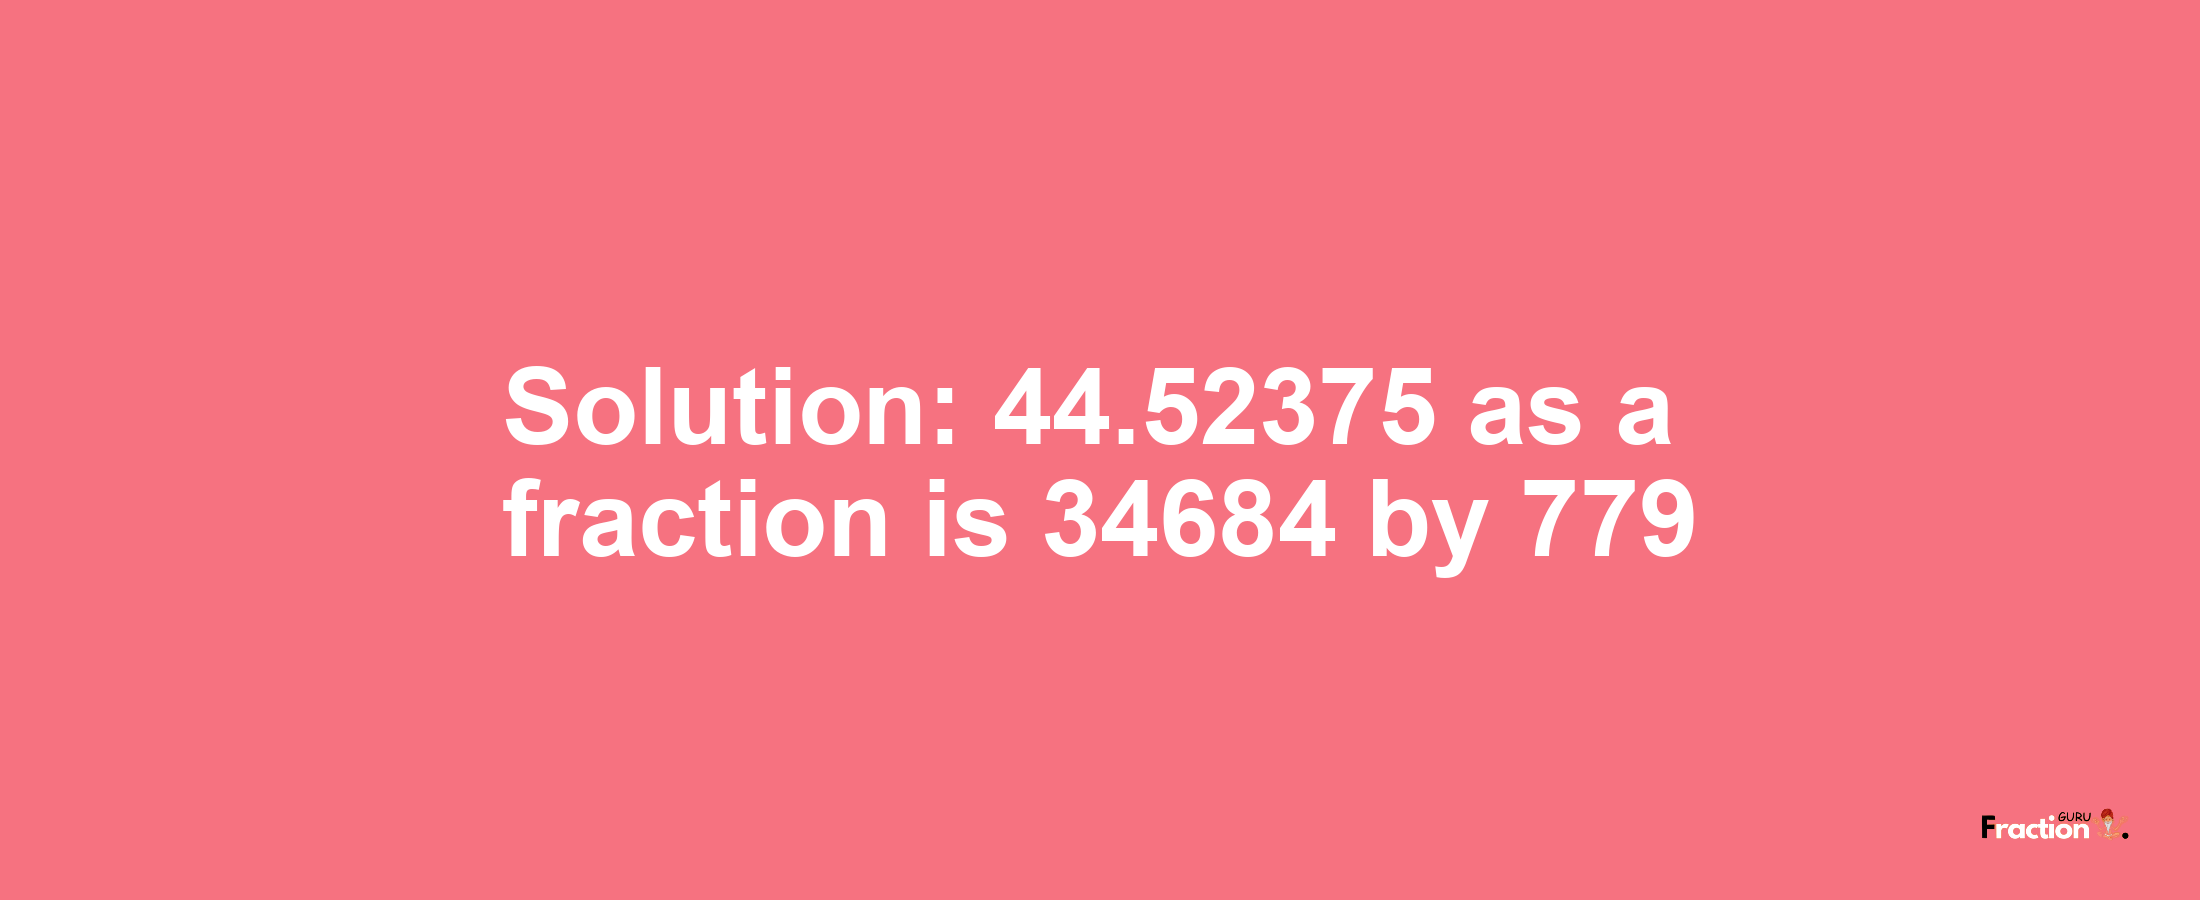 Solution:44.52375 as a fraction is 34684/779